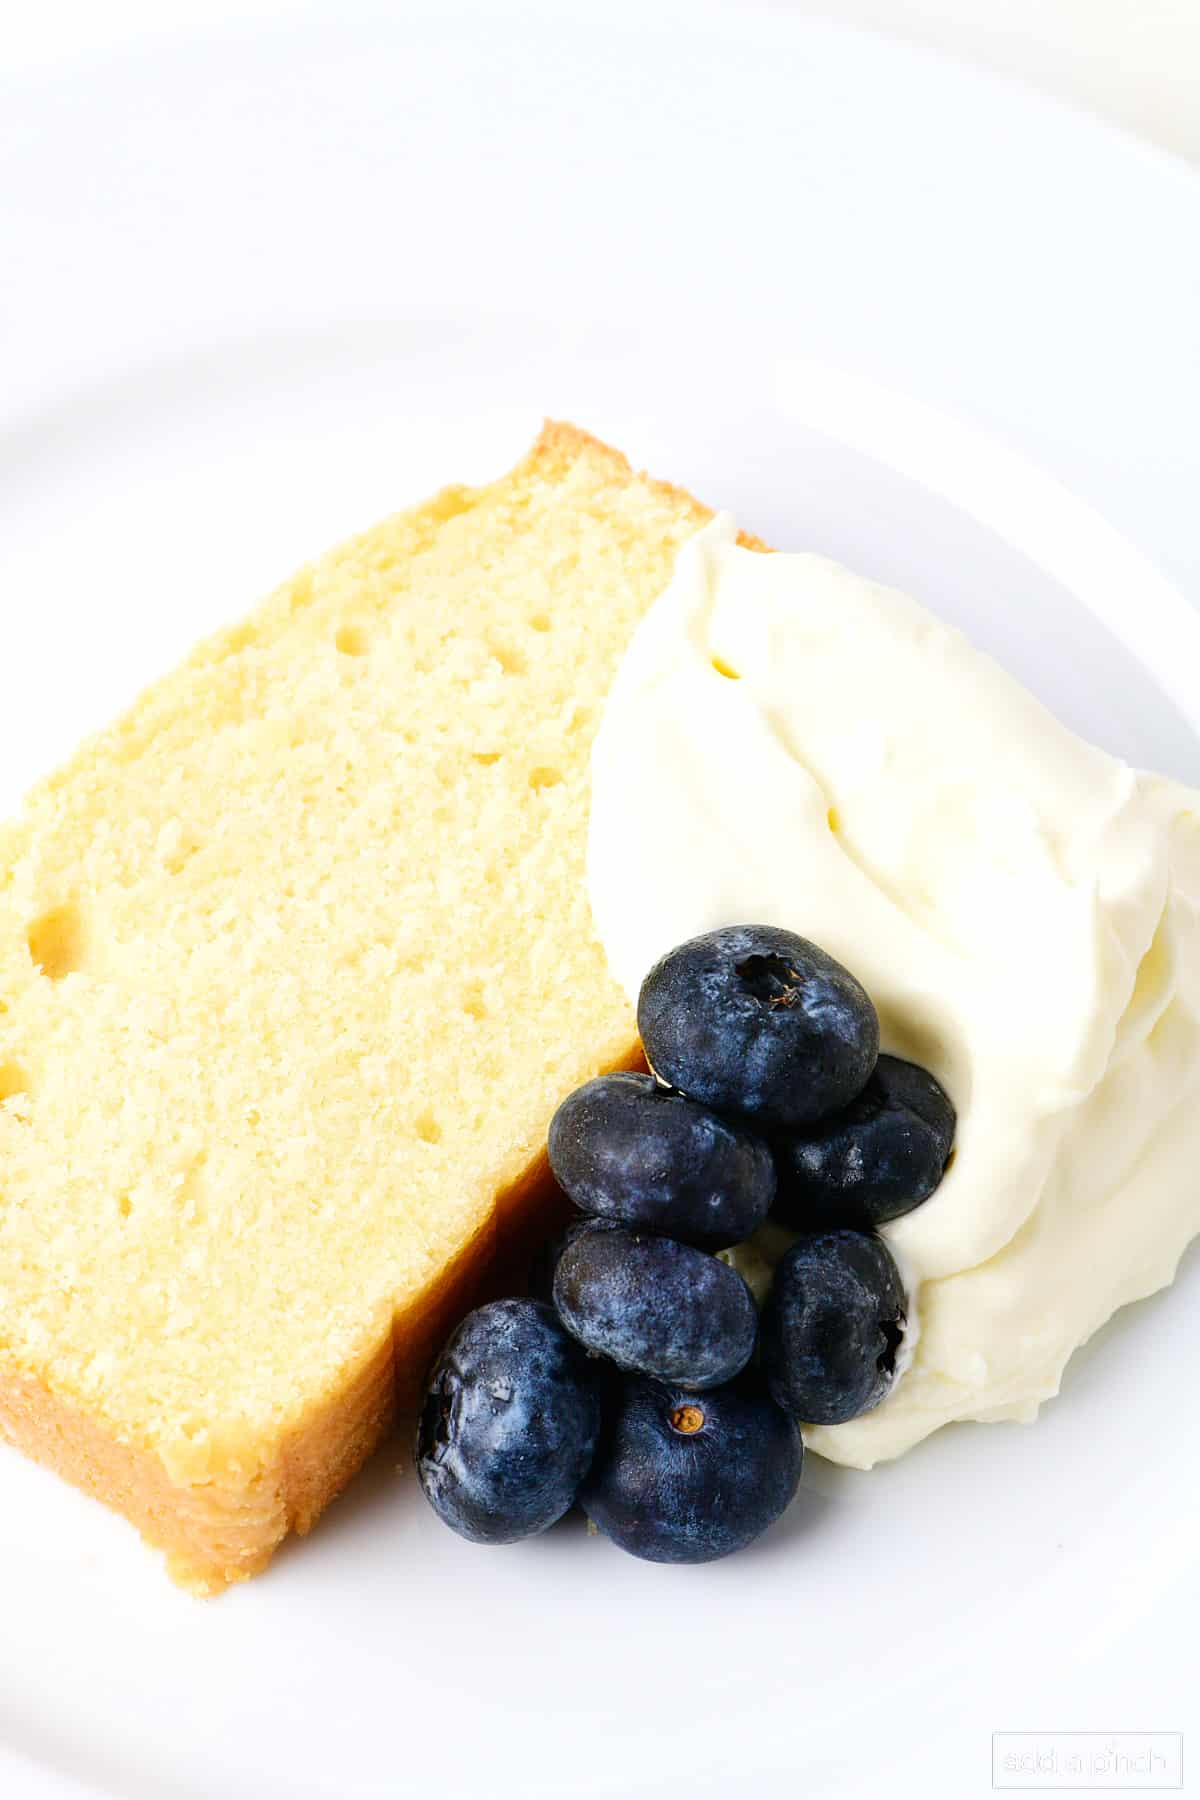 Closeup picture of pound cake slice garnished with homemade whipped cream and blueberries. 